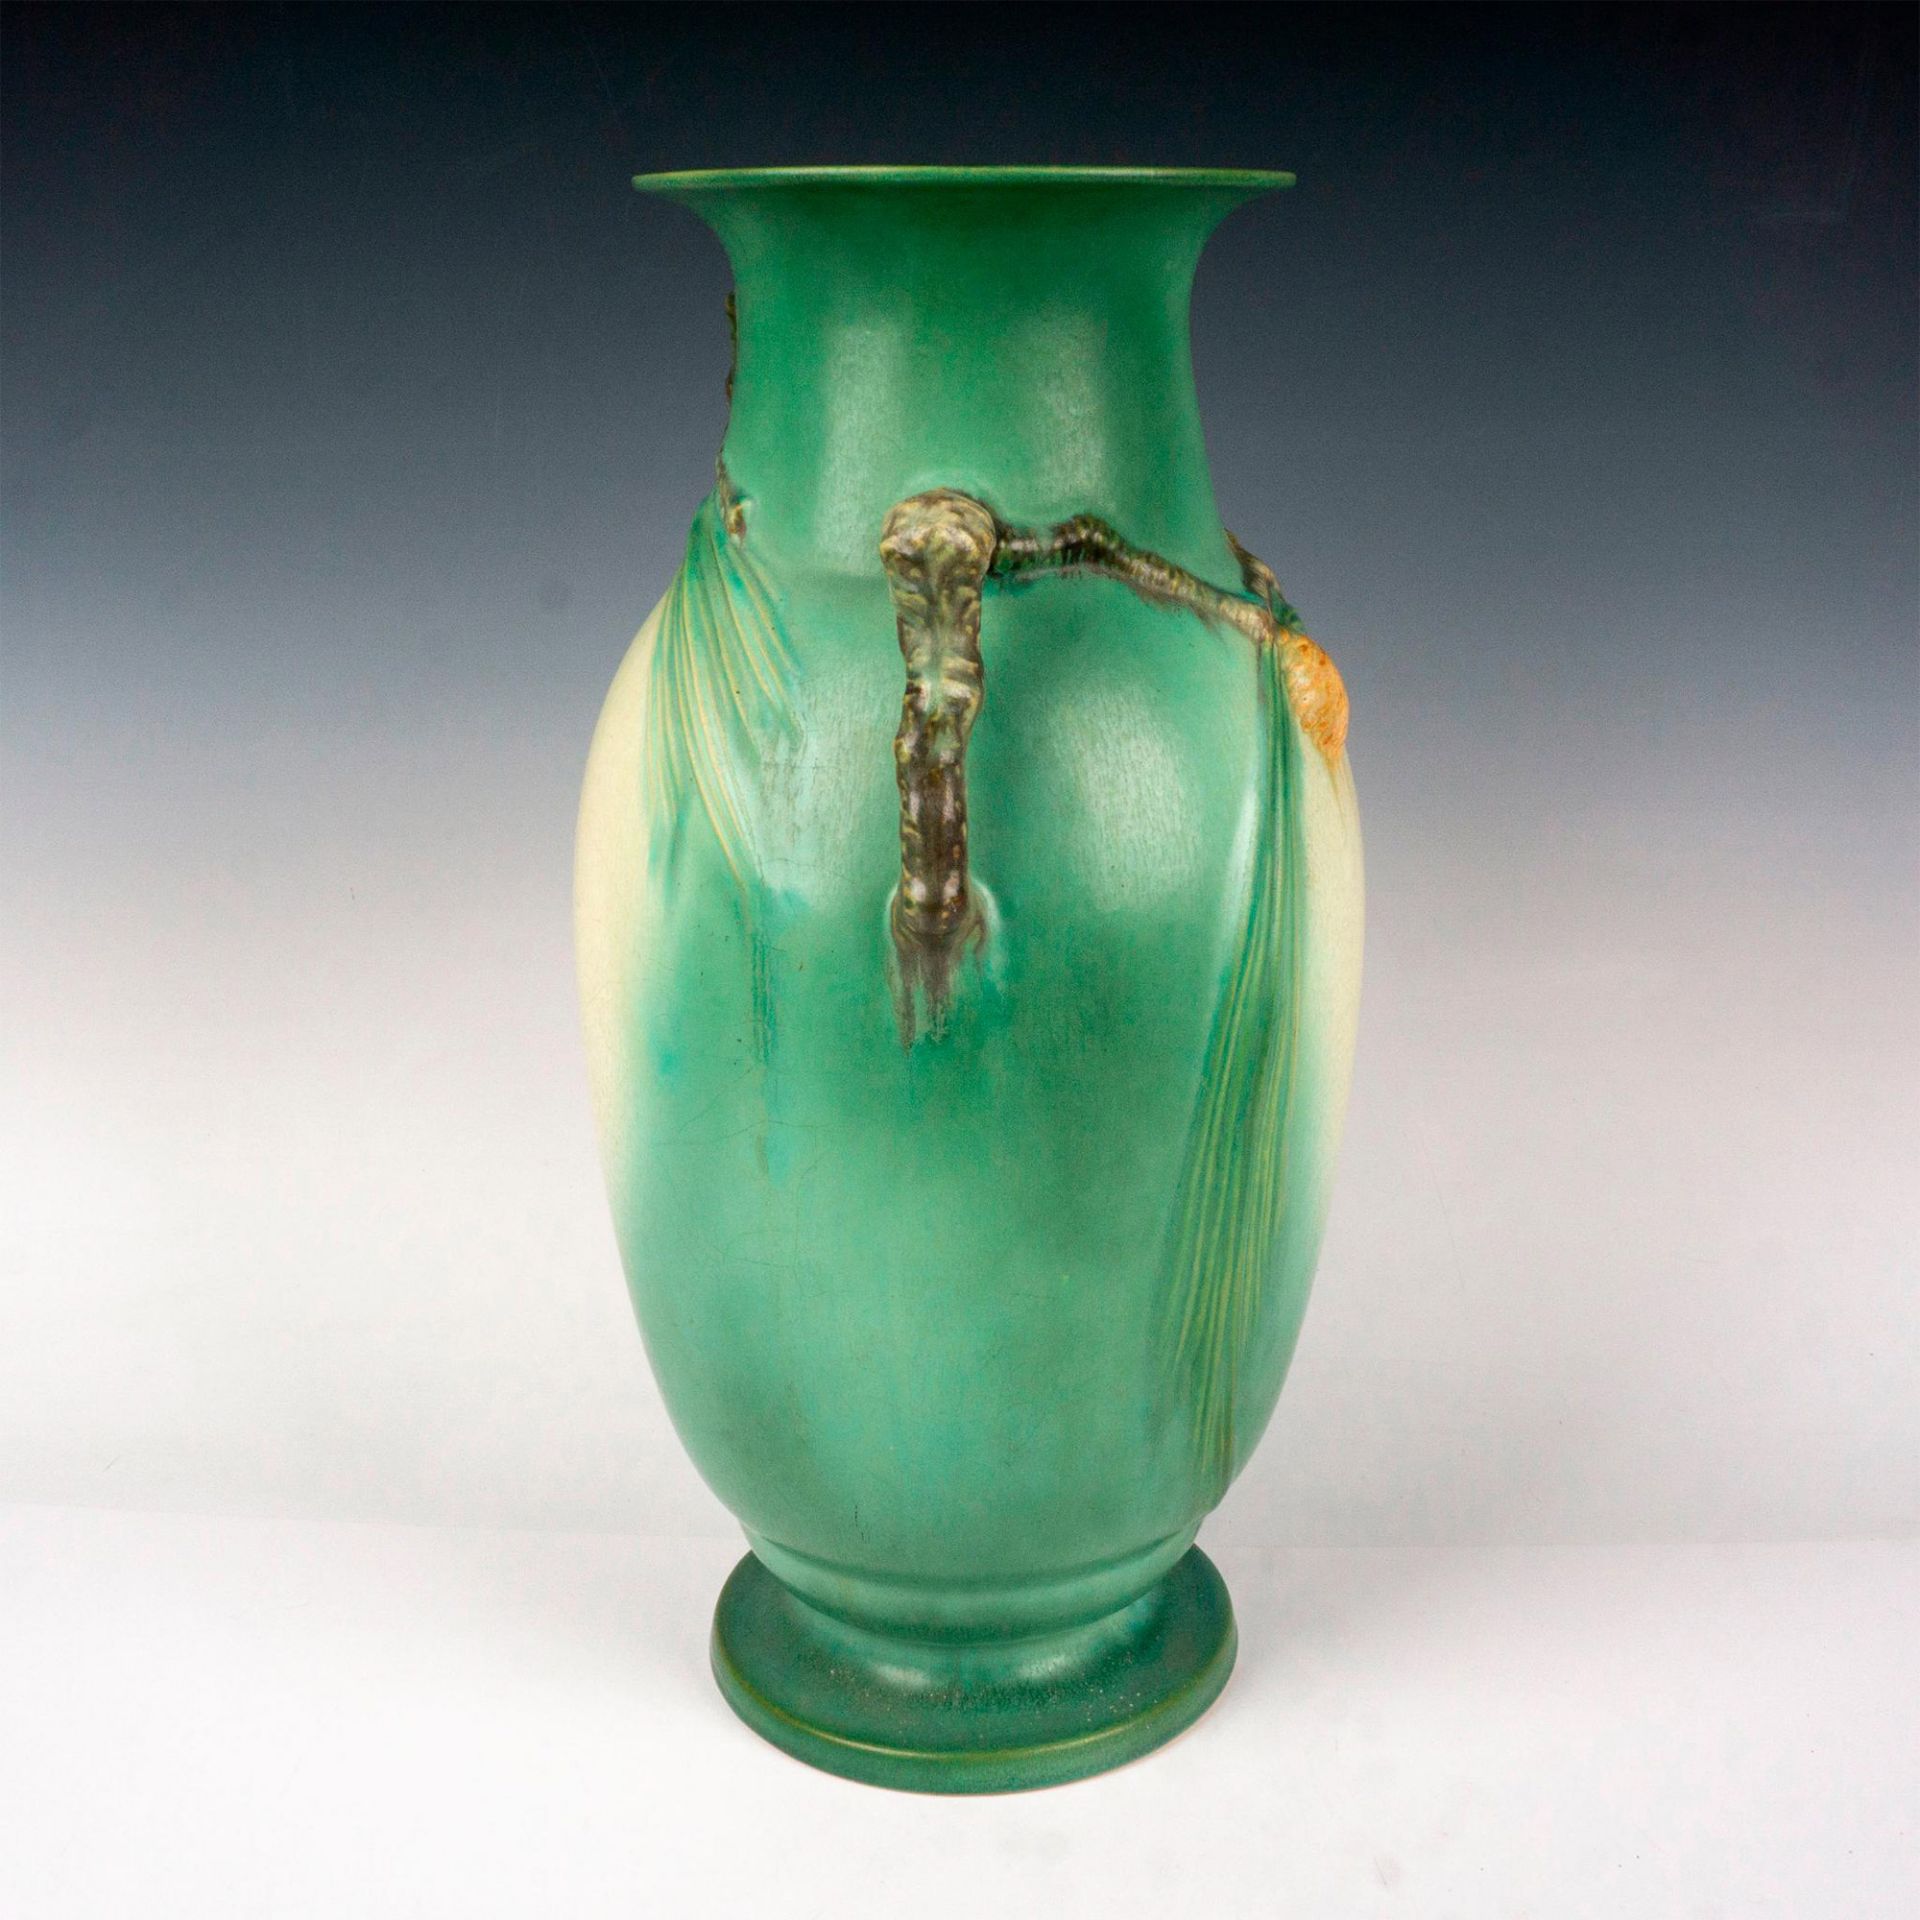 Roseville Pottery Branch Handles Vase, Pinecone Green - Image 2 of 3